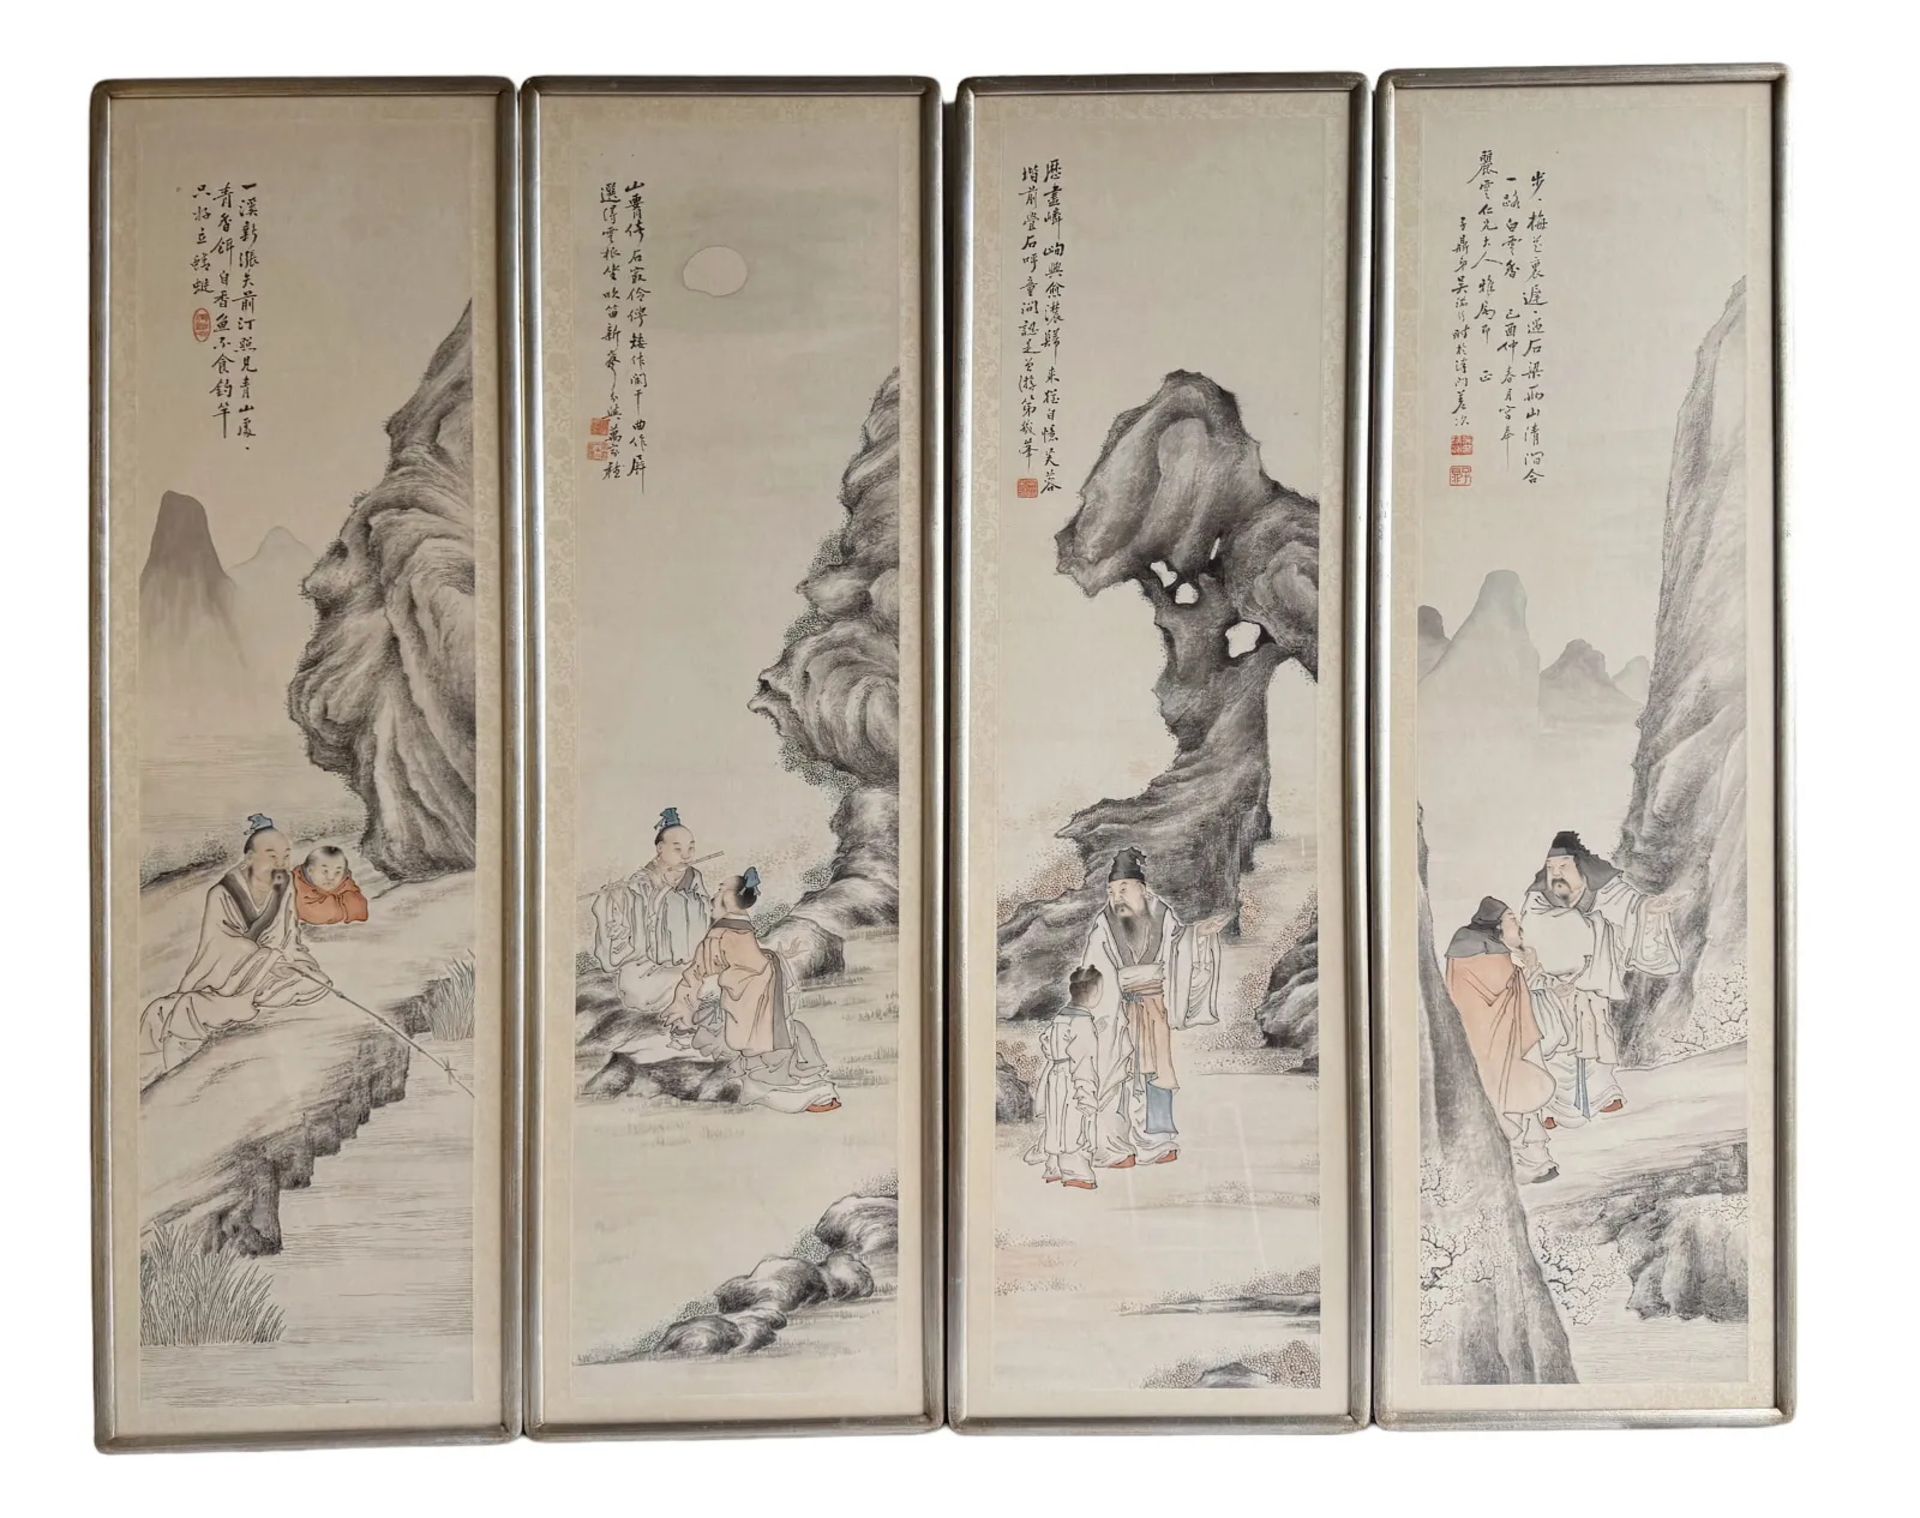 4 Chinese Ink Drawings of Guidance of Enlightenment Panels , Follower of Zhang Daqian